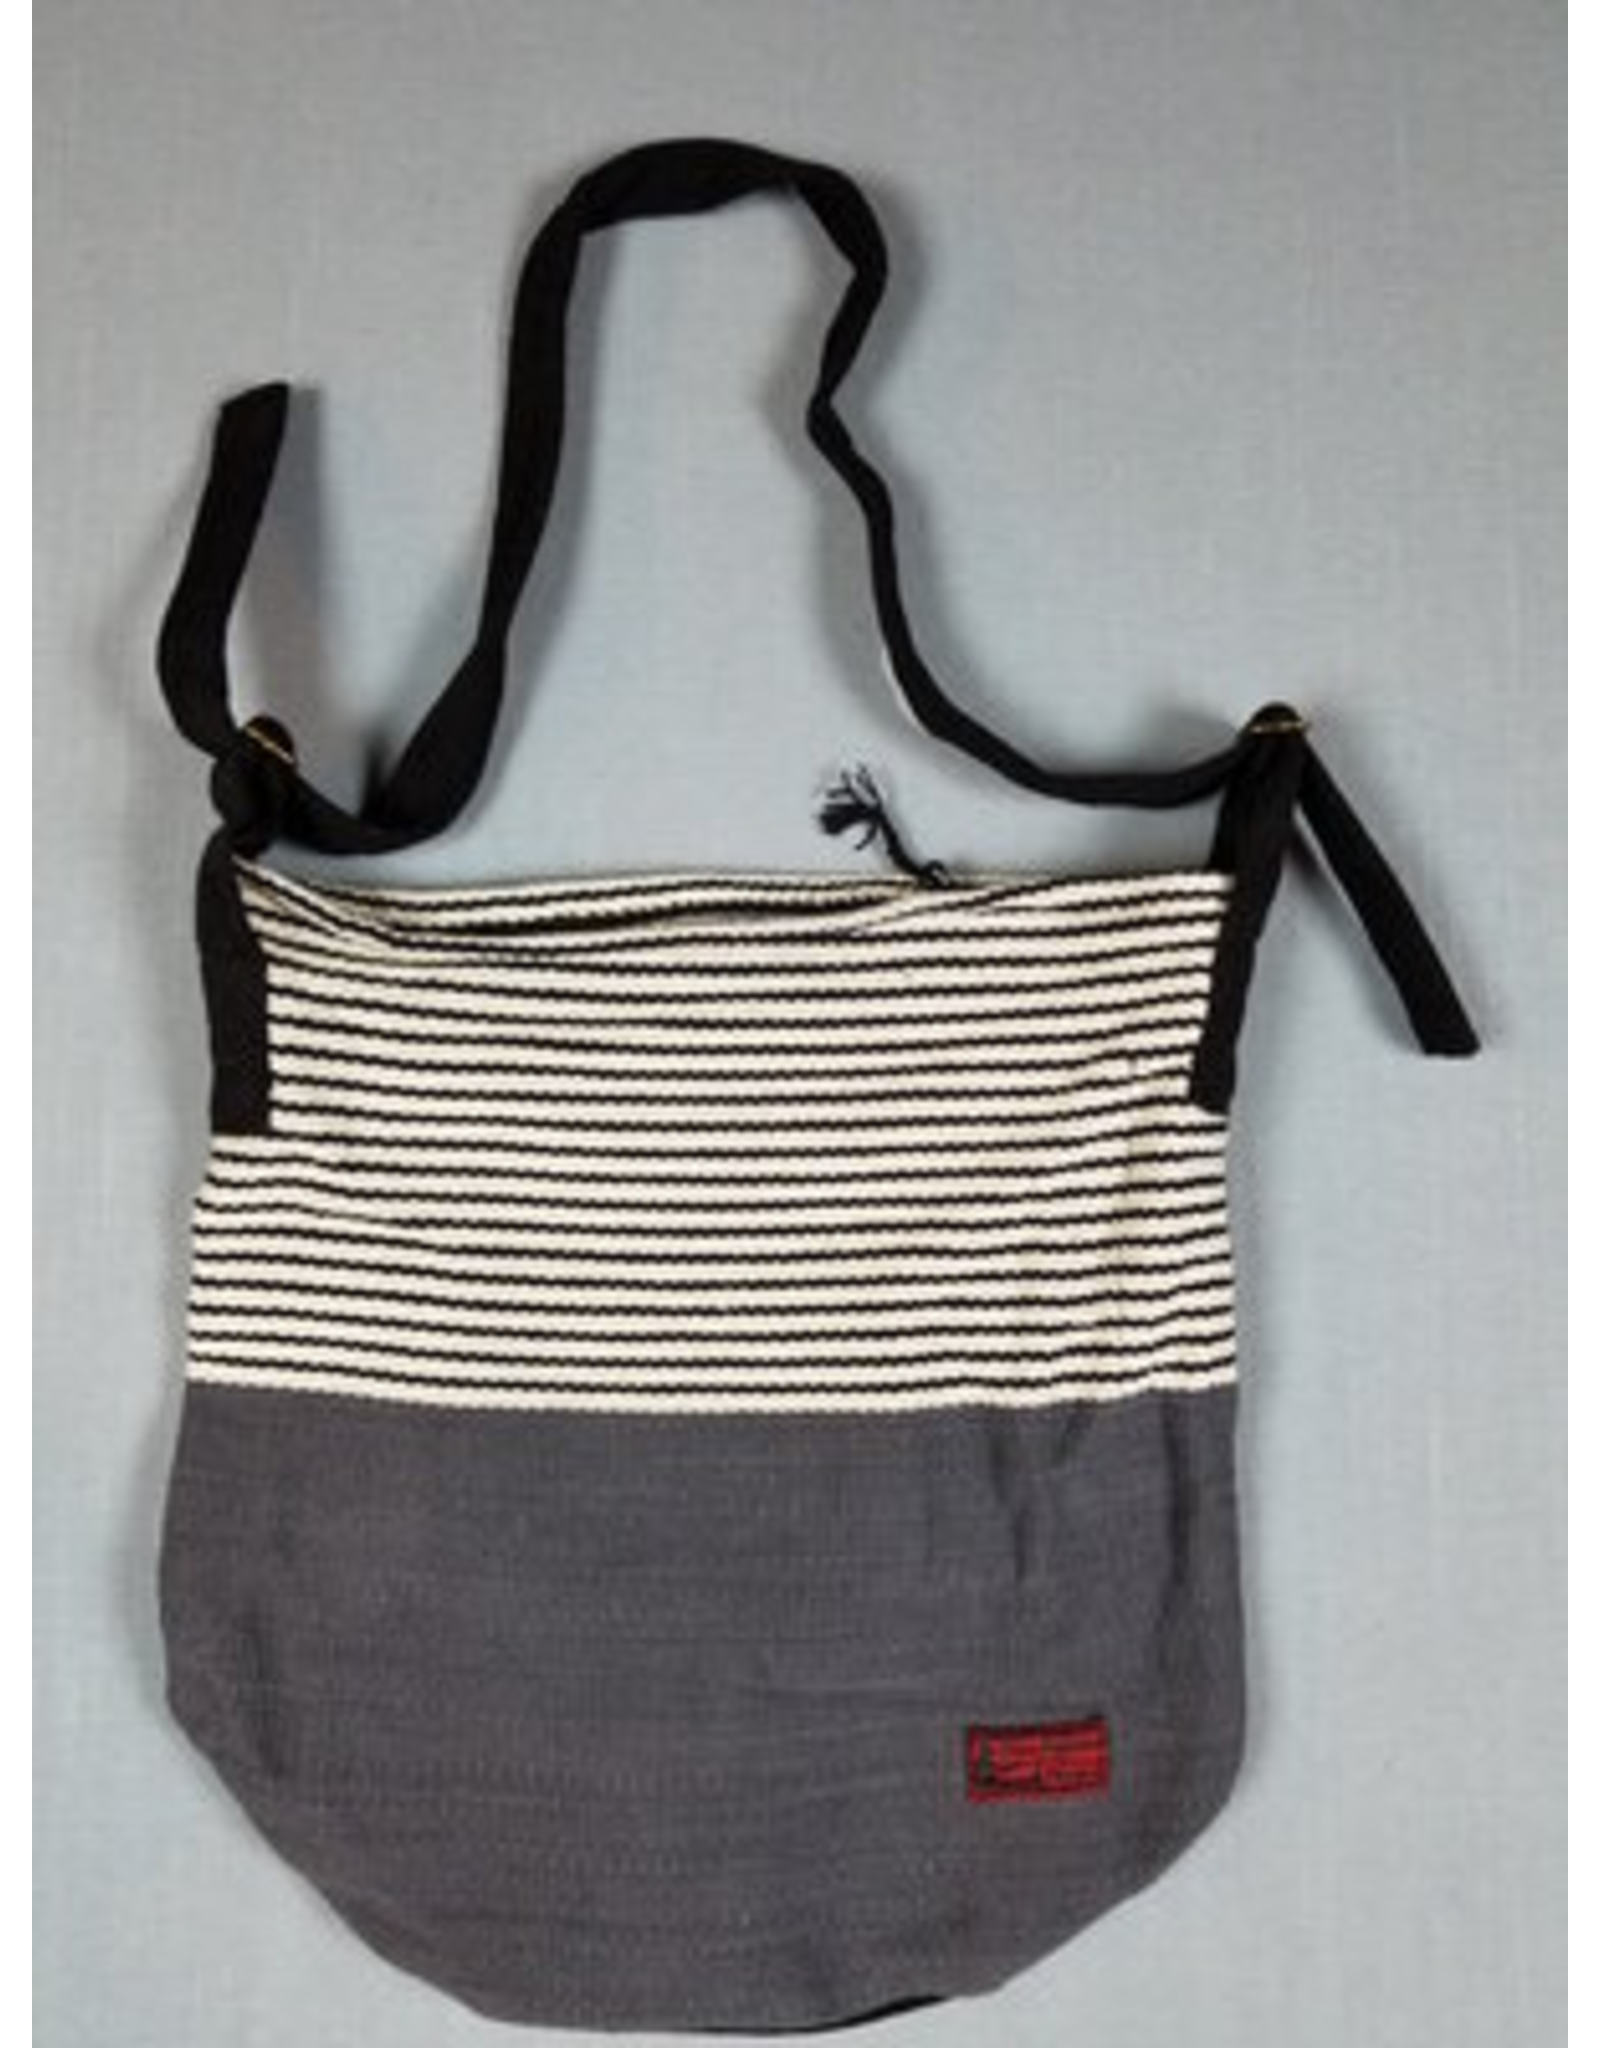 Trade roots Handwoven Day Bag, Gray, Nepal